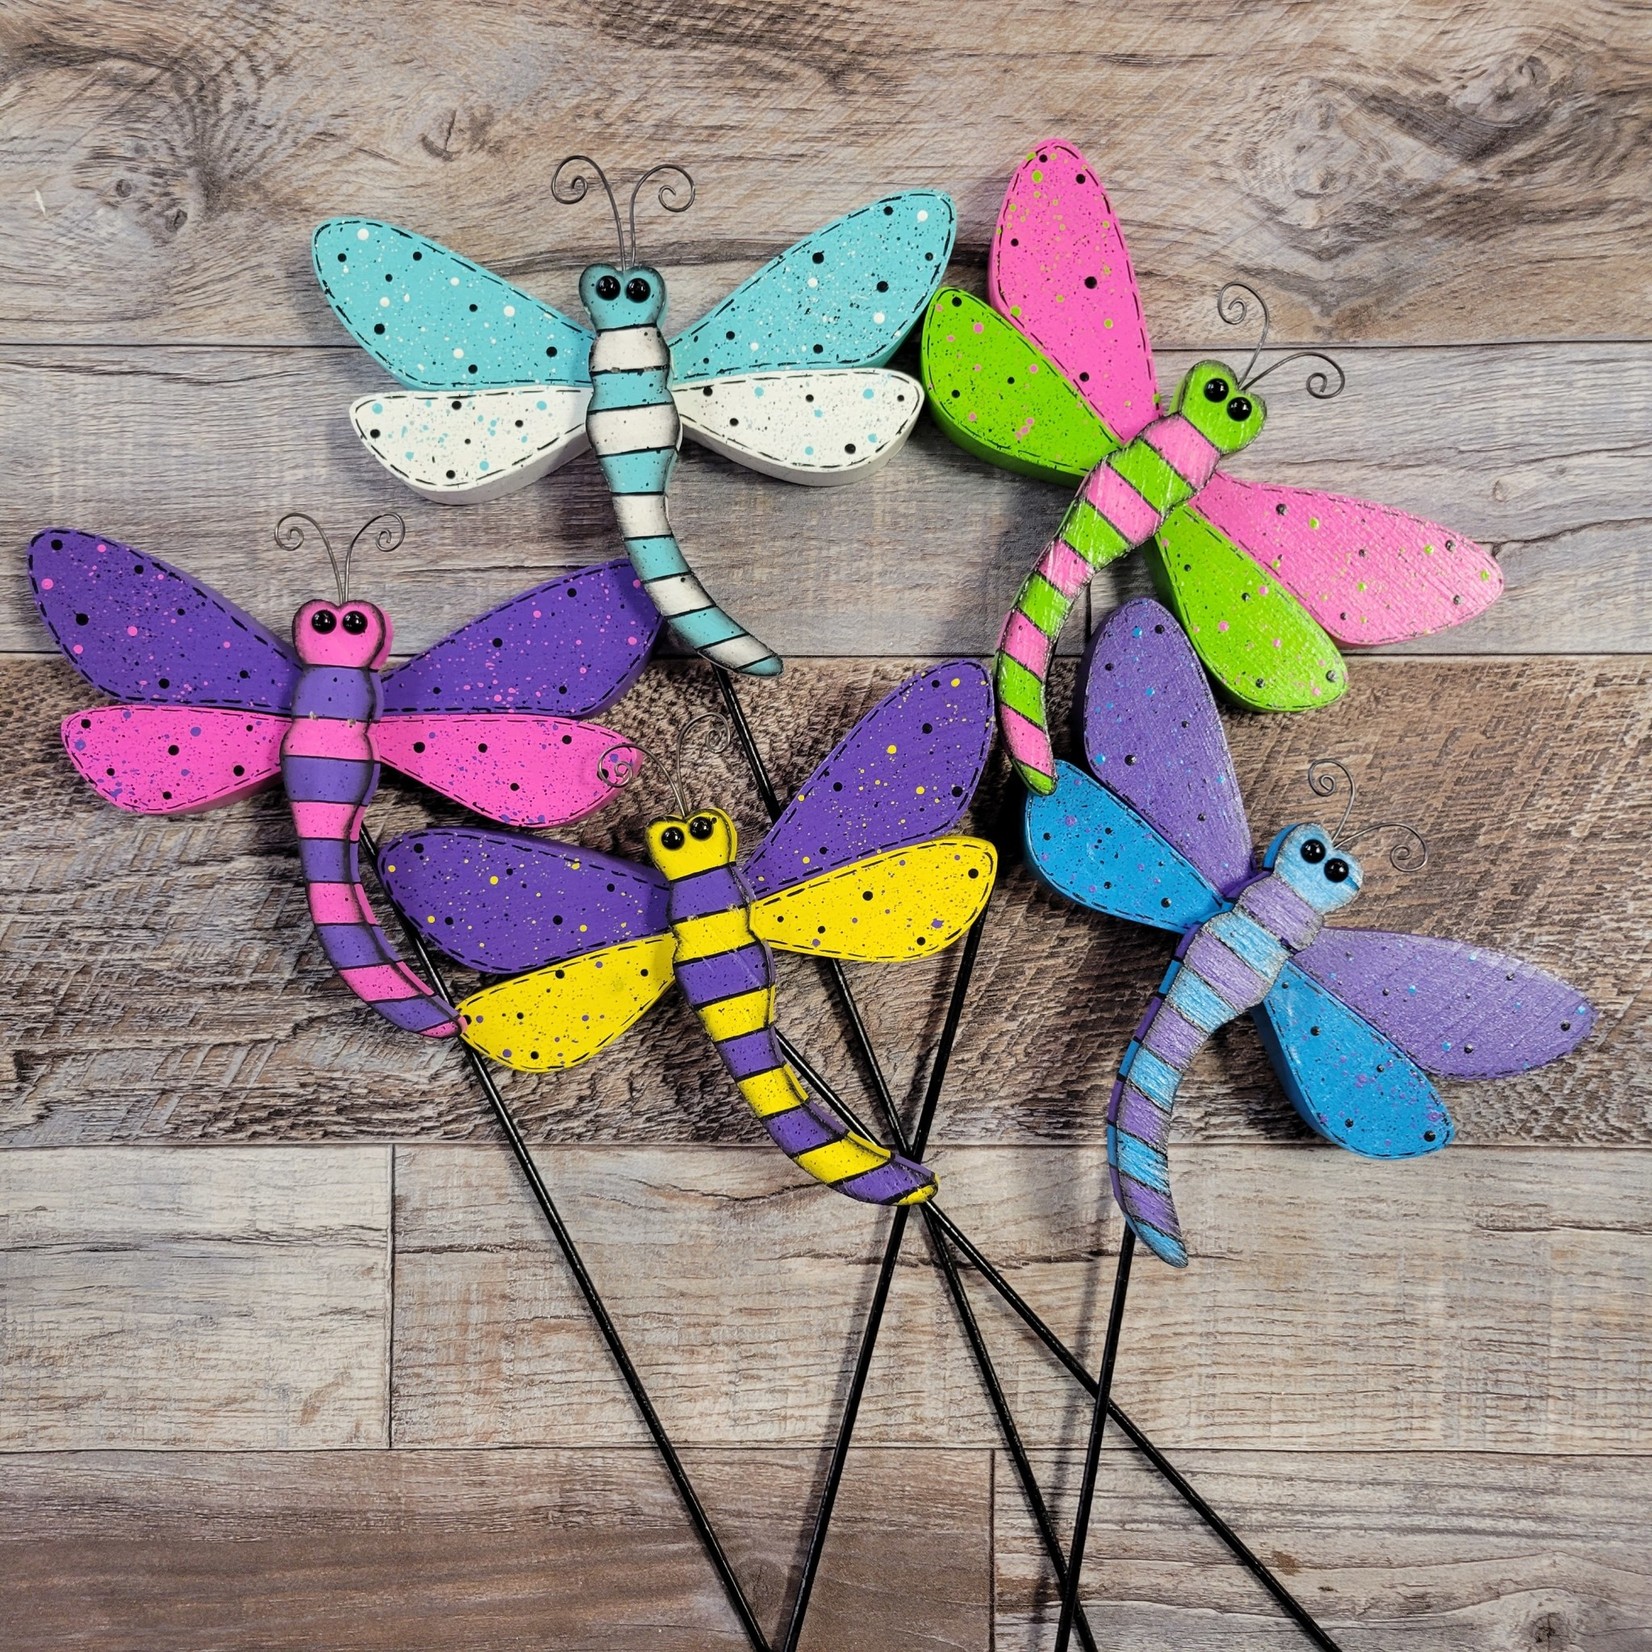 Sharon's Small Wooden Dragonfly